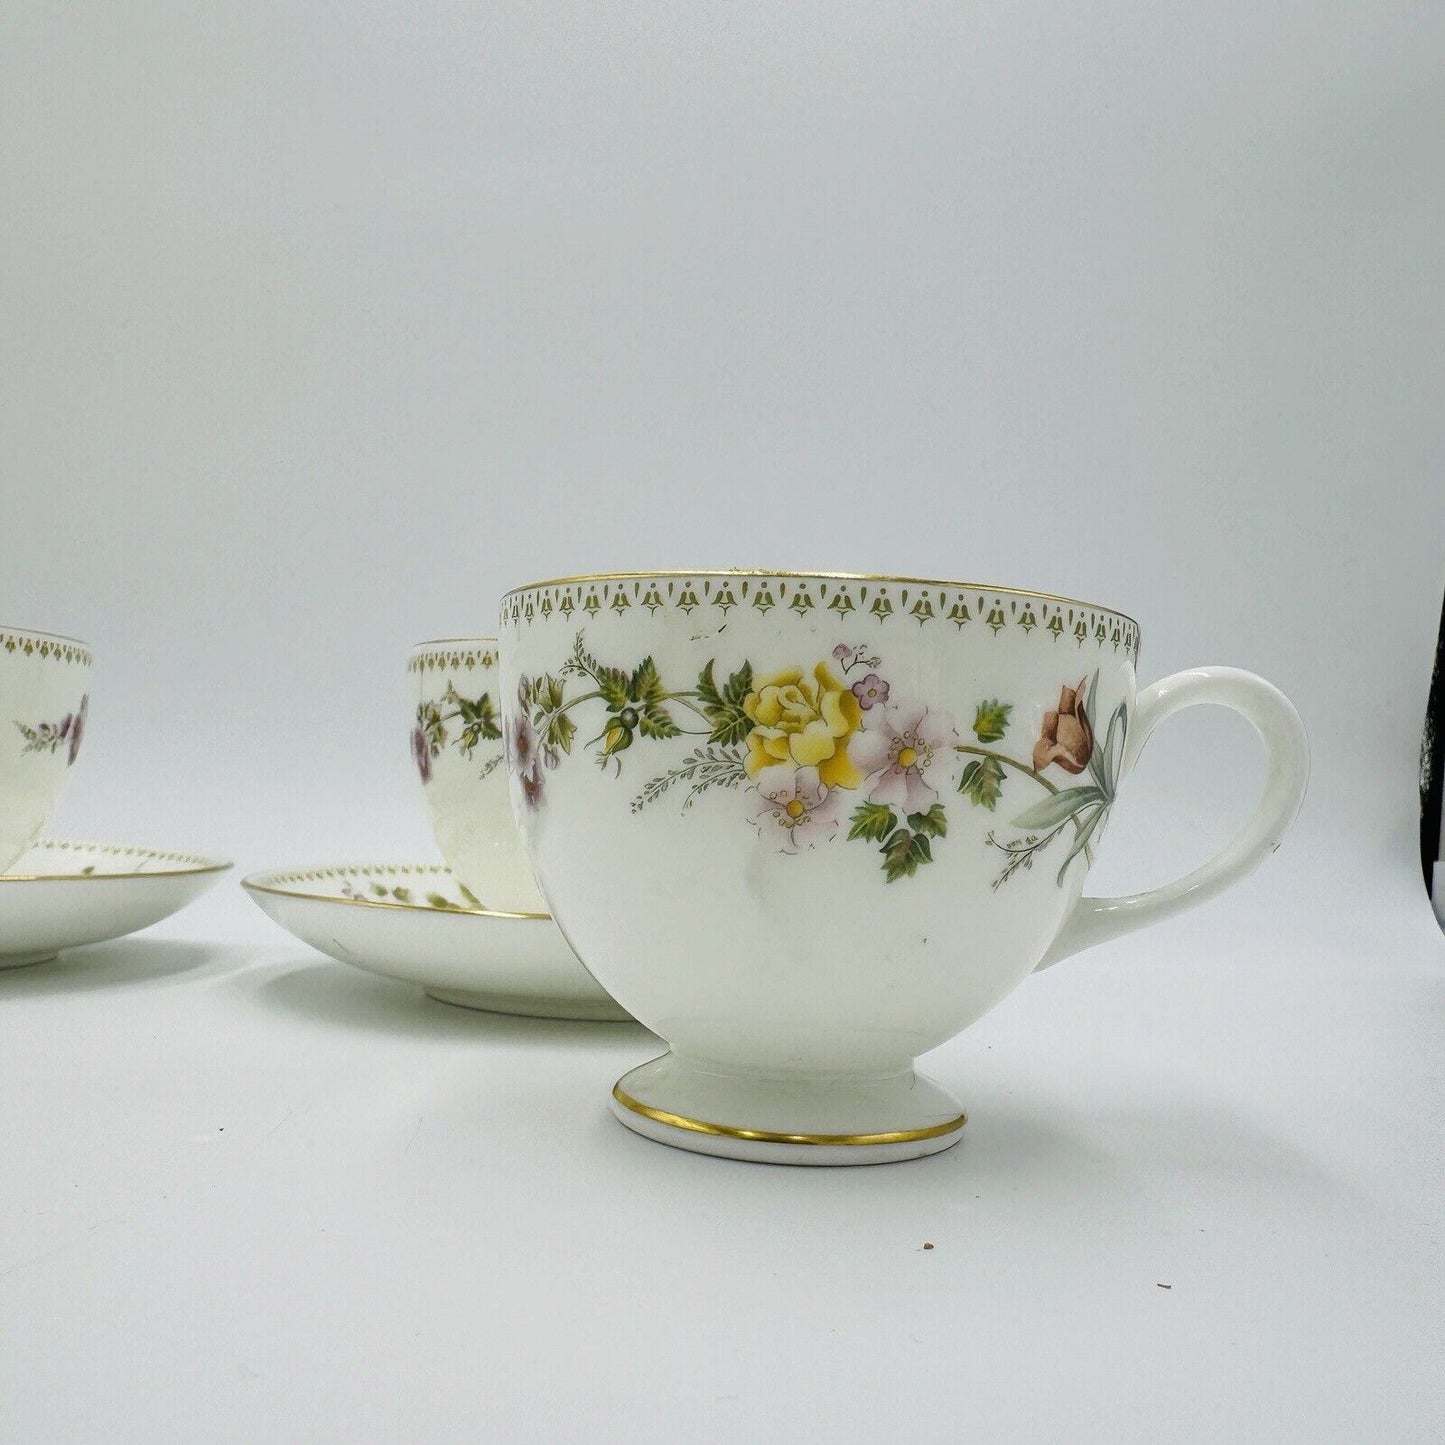 Wedgwood Bone China England Mirabelle R4537 4 Teacups & Two Saucers Floral